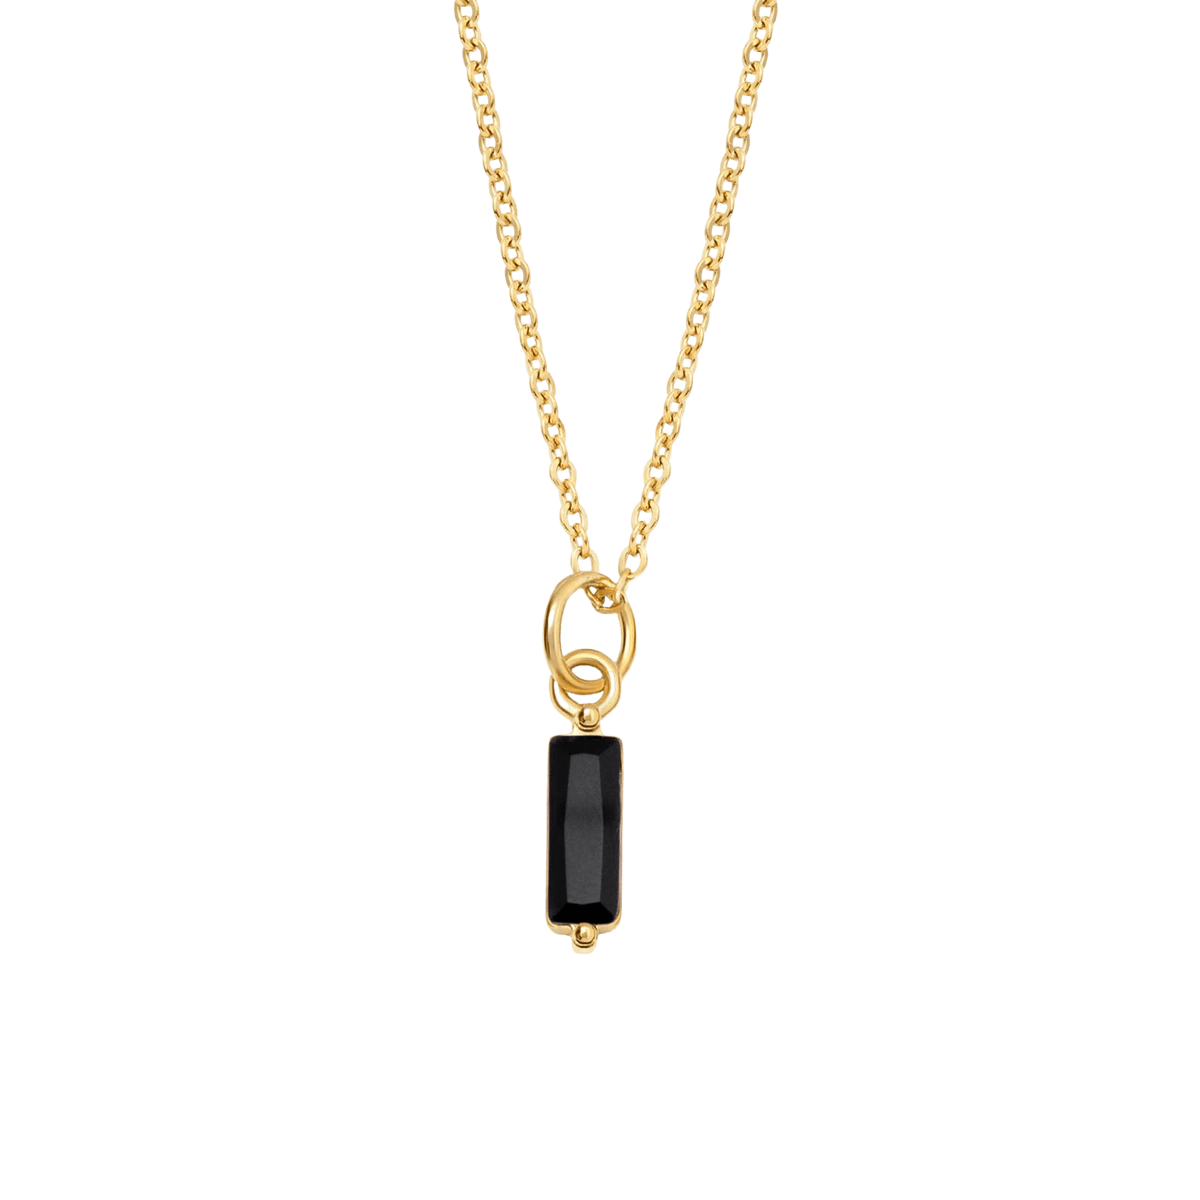 BohoMoon Stainless Steel Onyx Necklace Gold